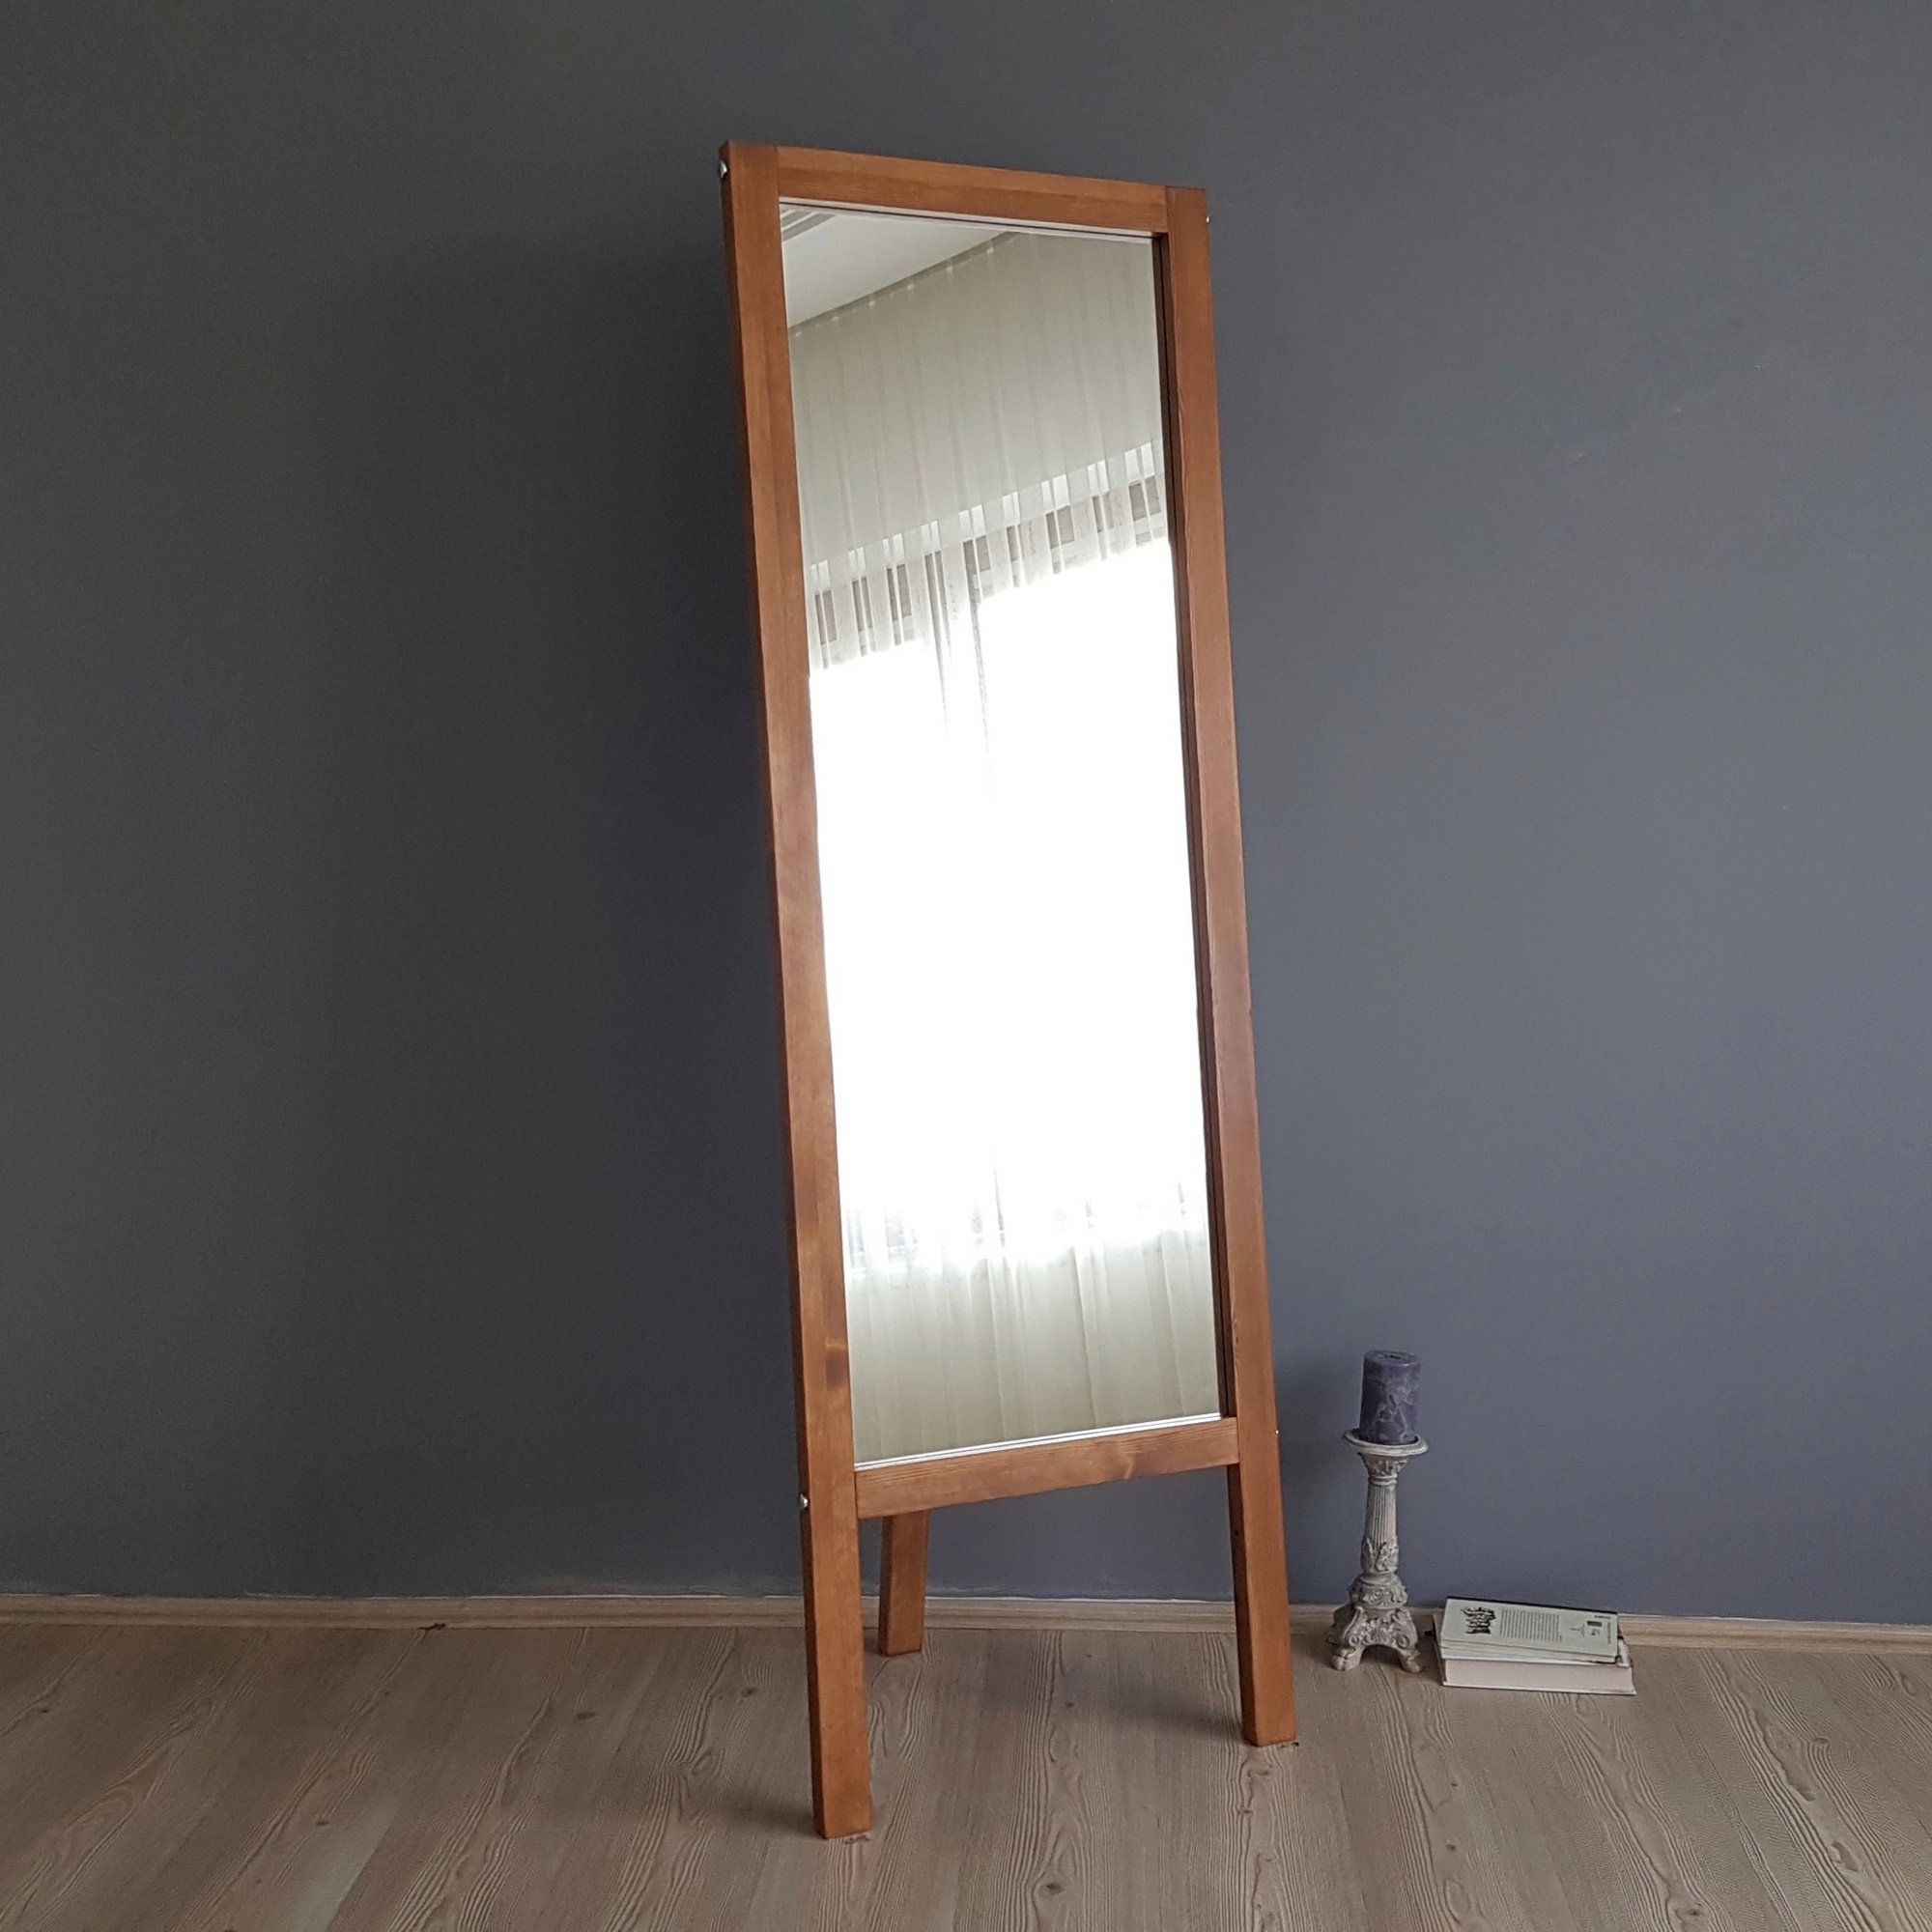 A42 Natural Wood Standing Mirror